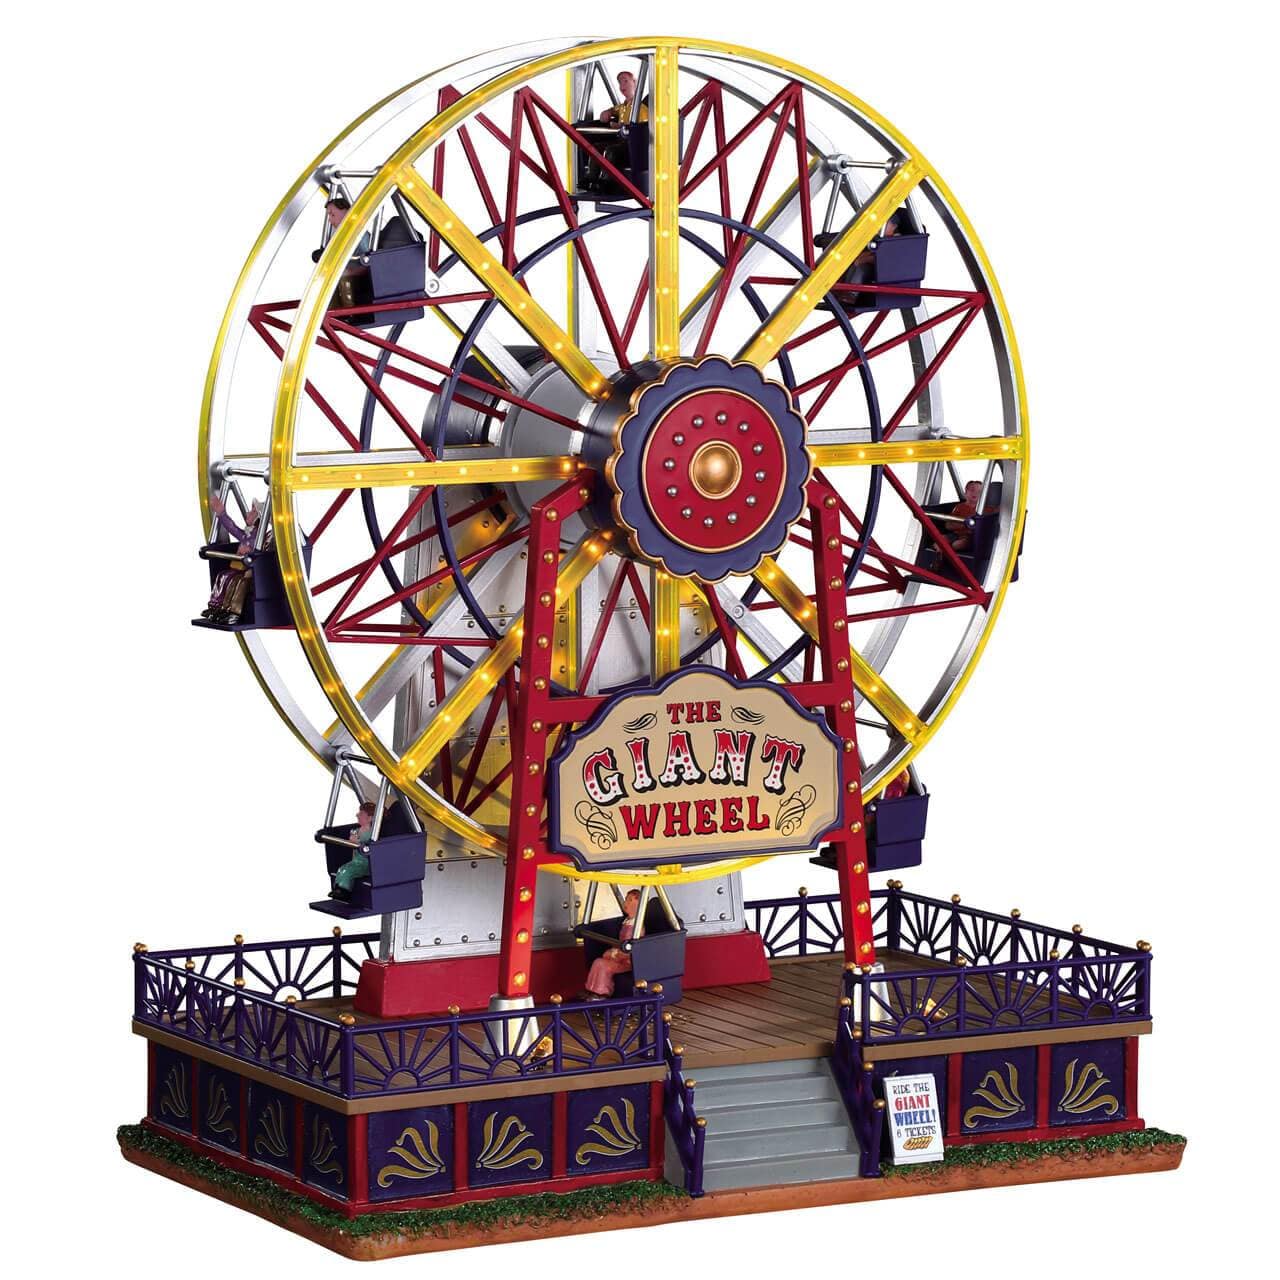 Lemax Sights and Sounds Lemax The Giant Wheel, Carnival Village, With 4.5V Adaptor